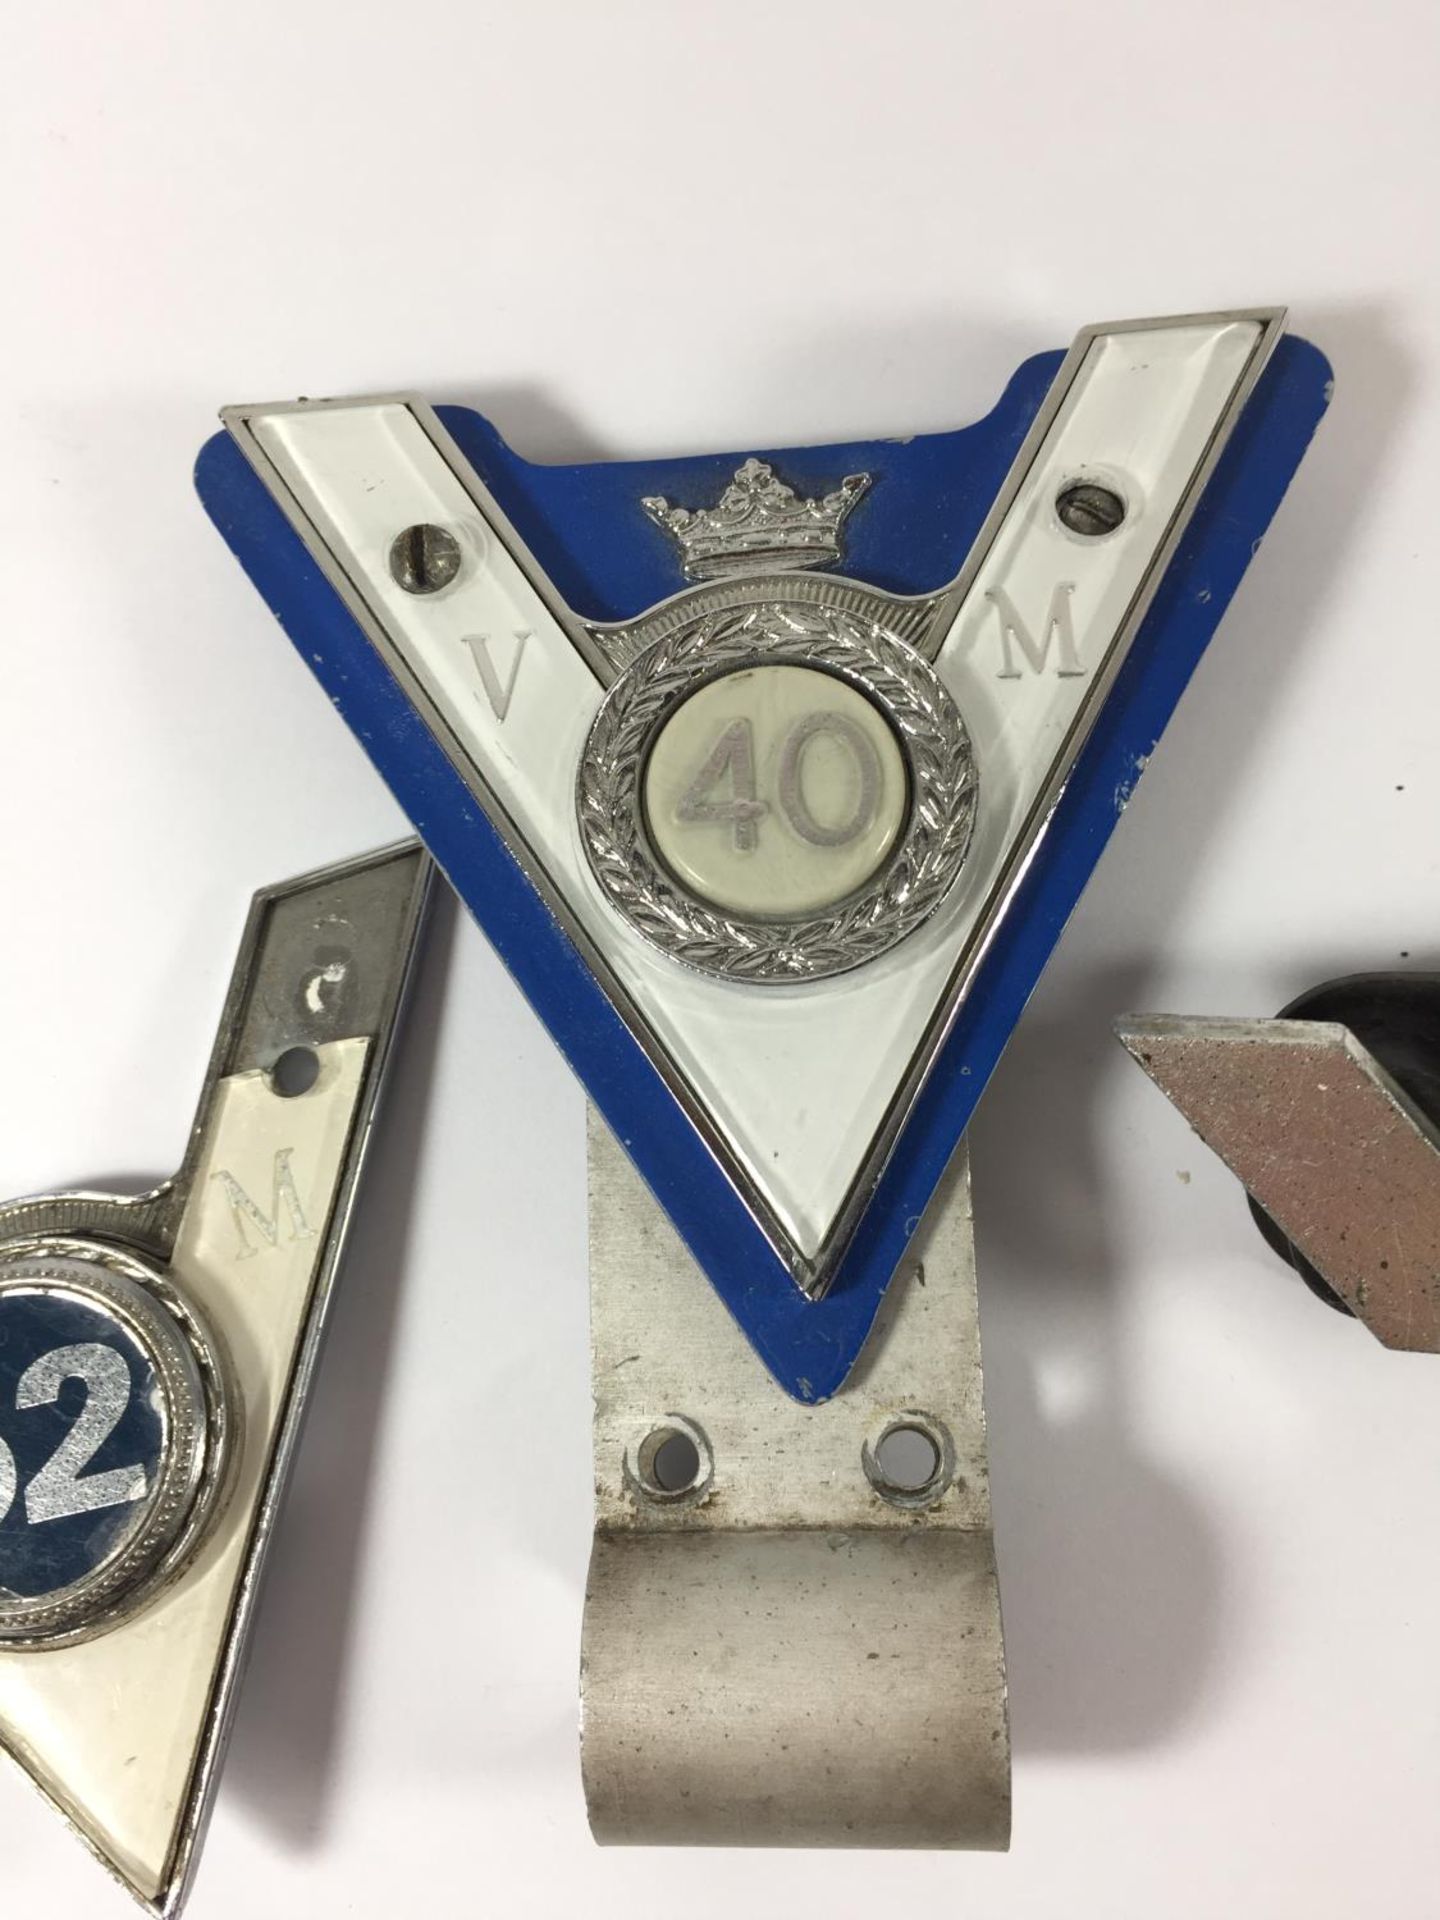 TWO VINTAGE VETERAN MOTOR CLUB BADGES 40 YEARS AND 52 YEARS AND A V8 LOGO - Image 3 of 3